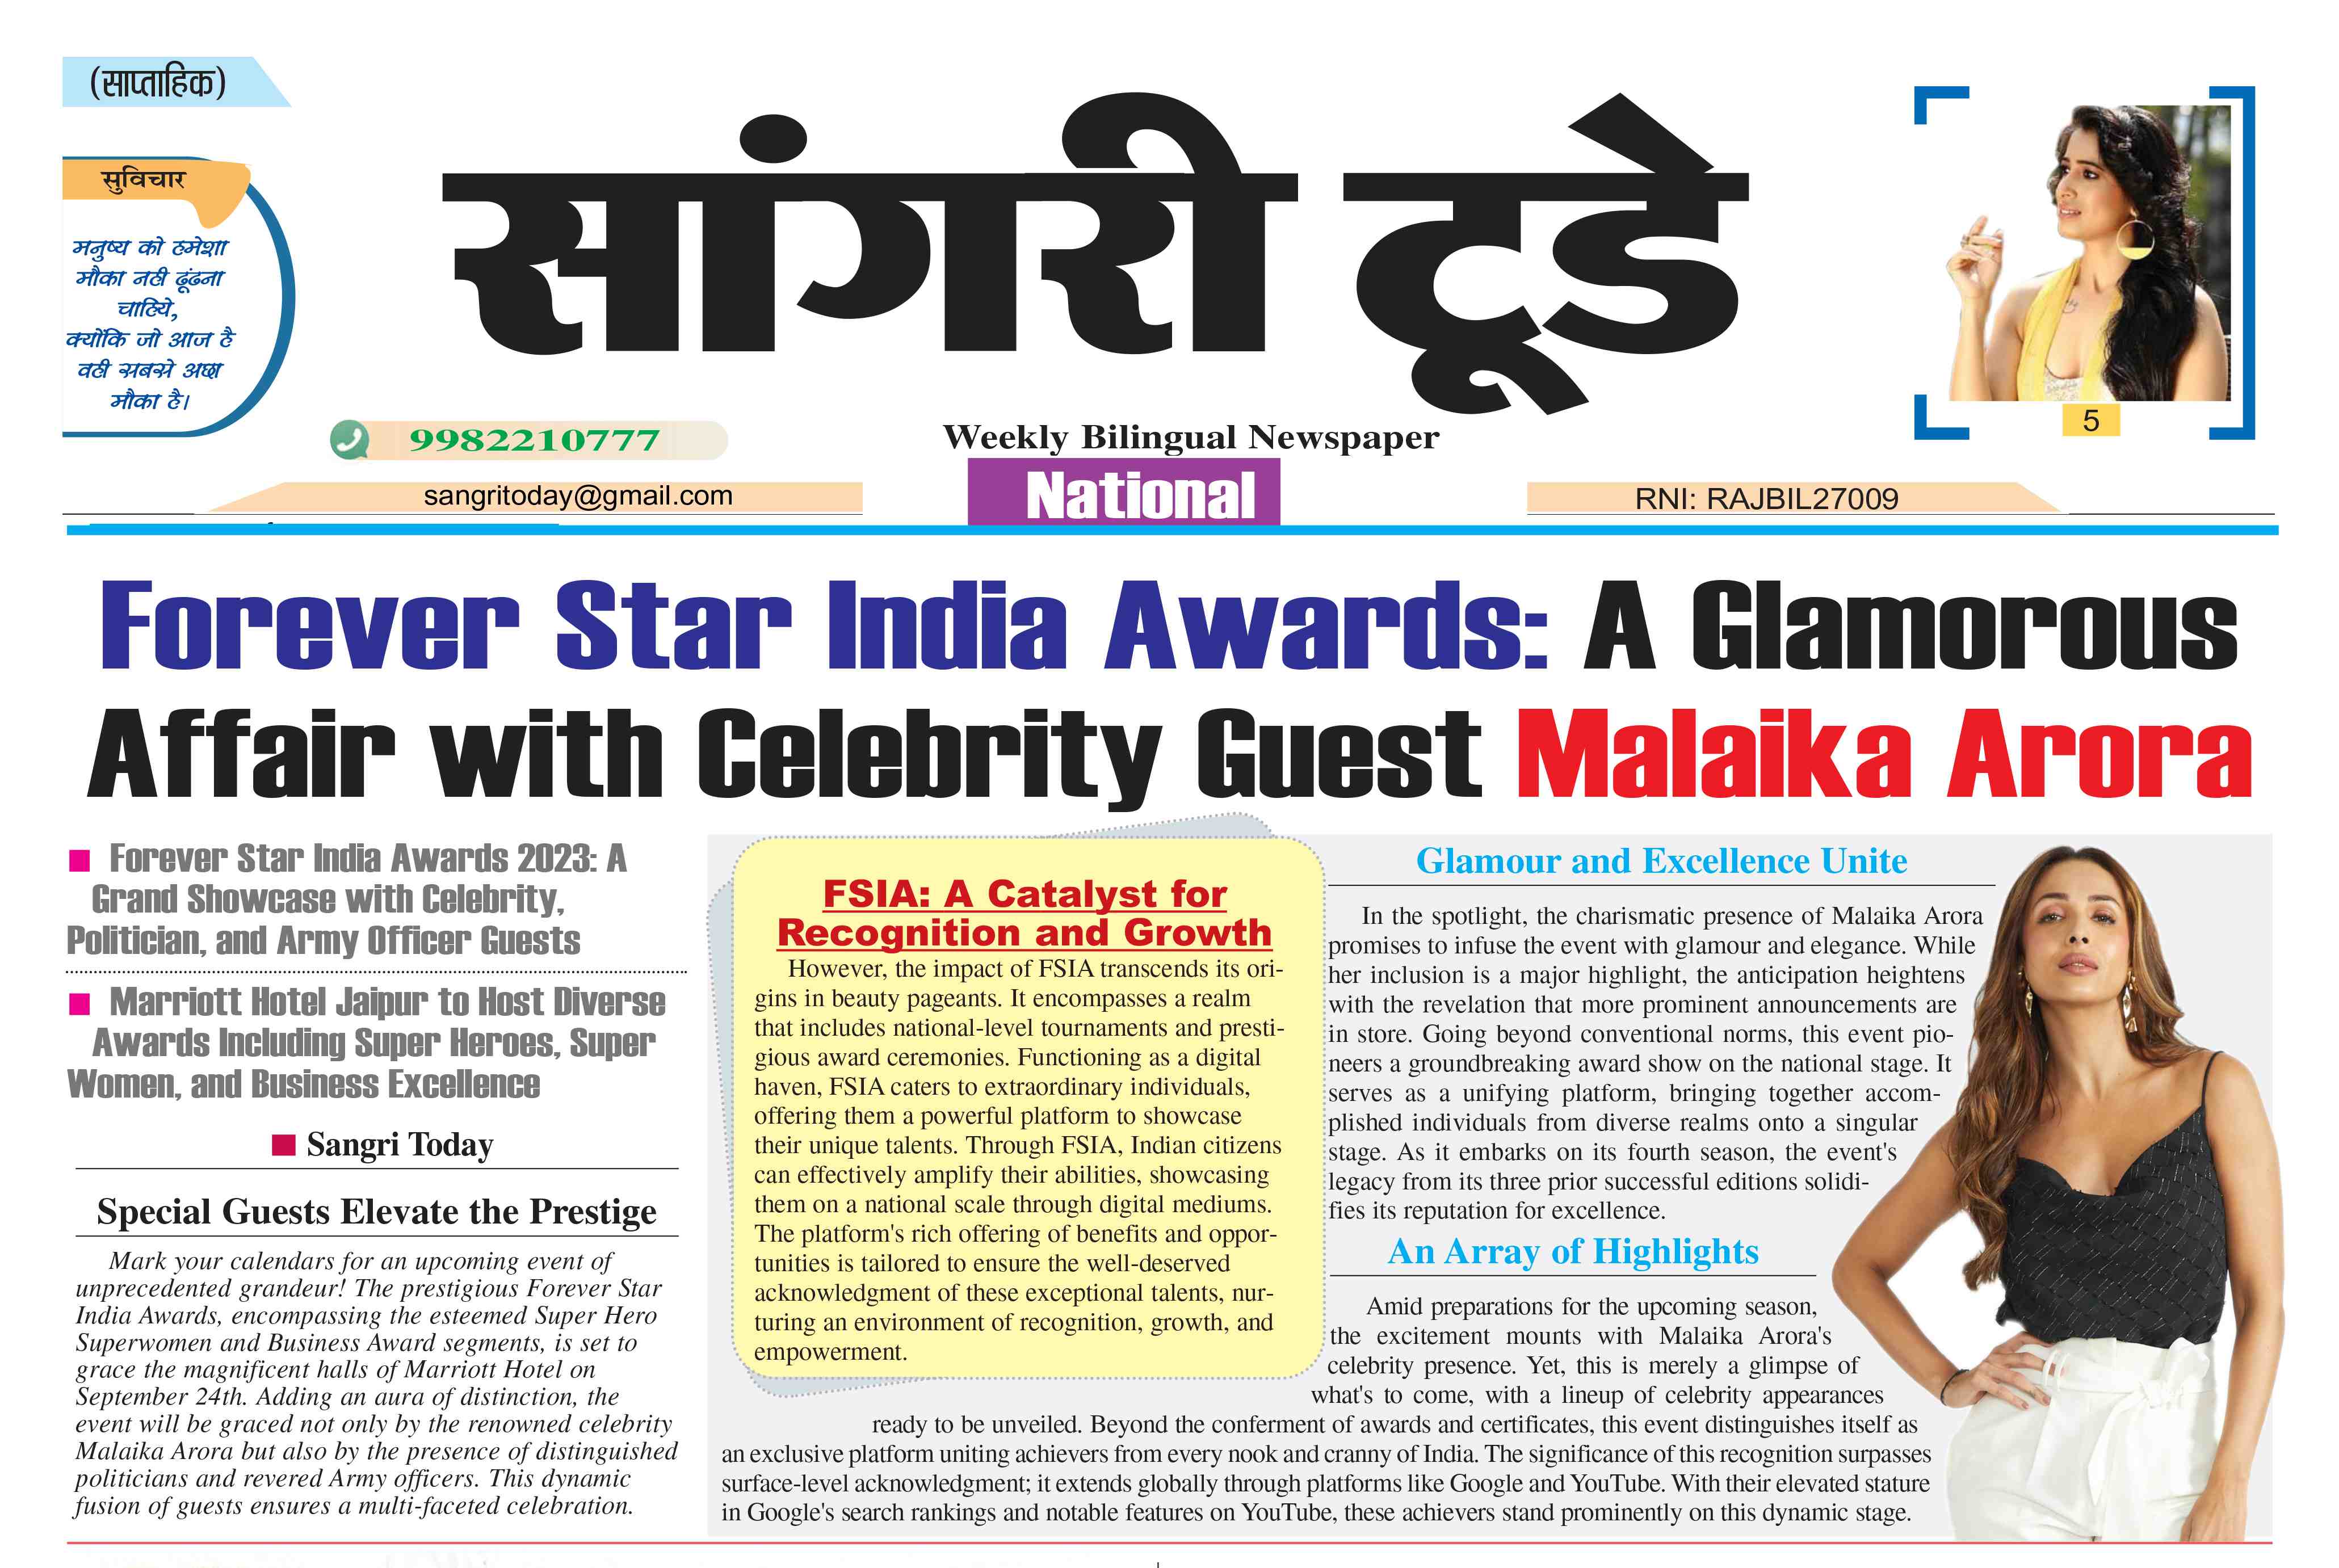 Malaika Arora is coming for Grand Finale